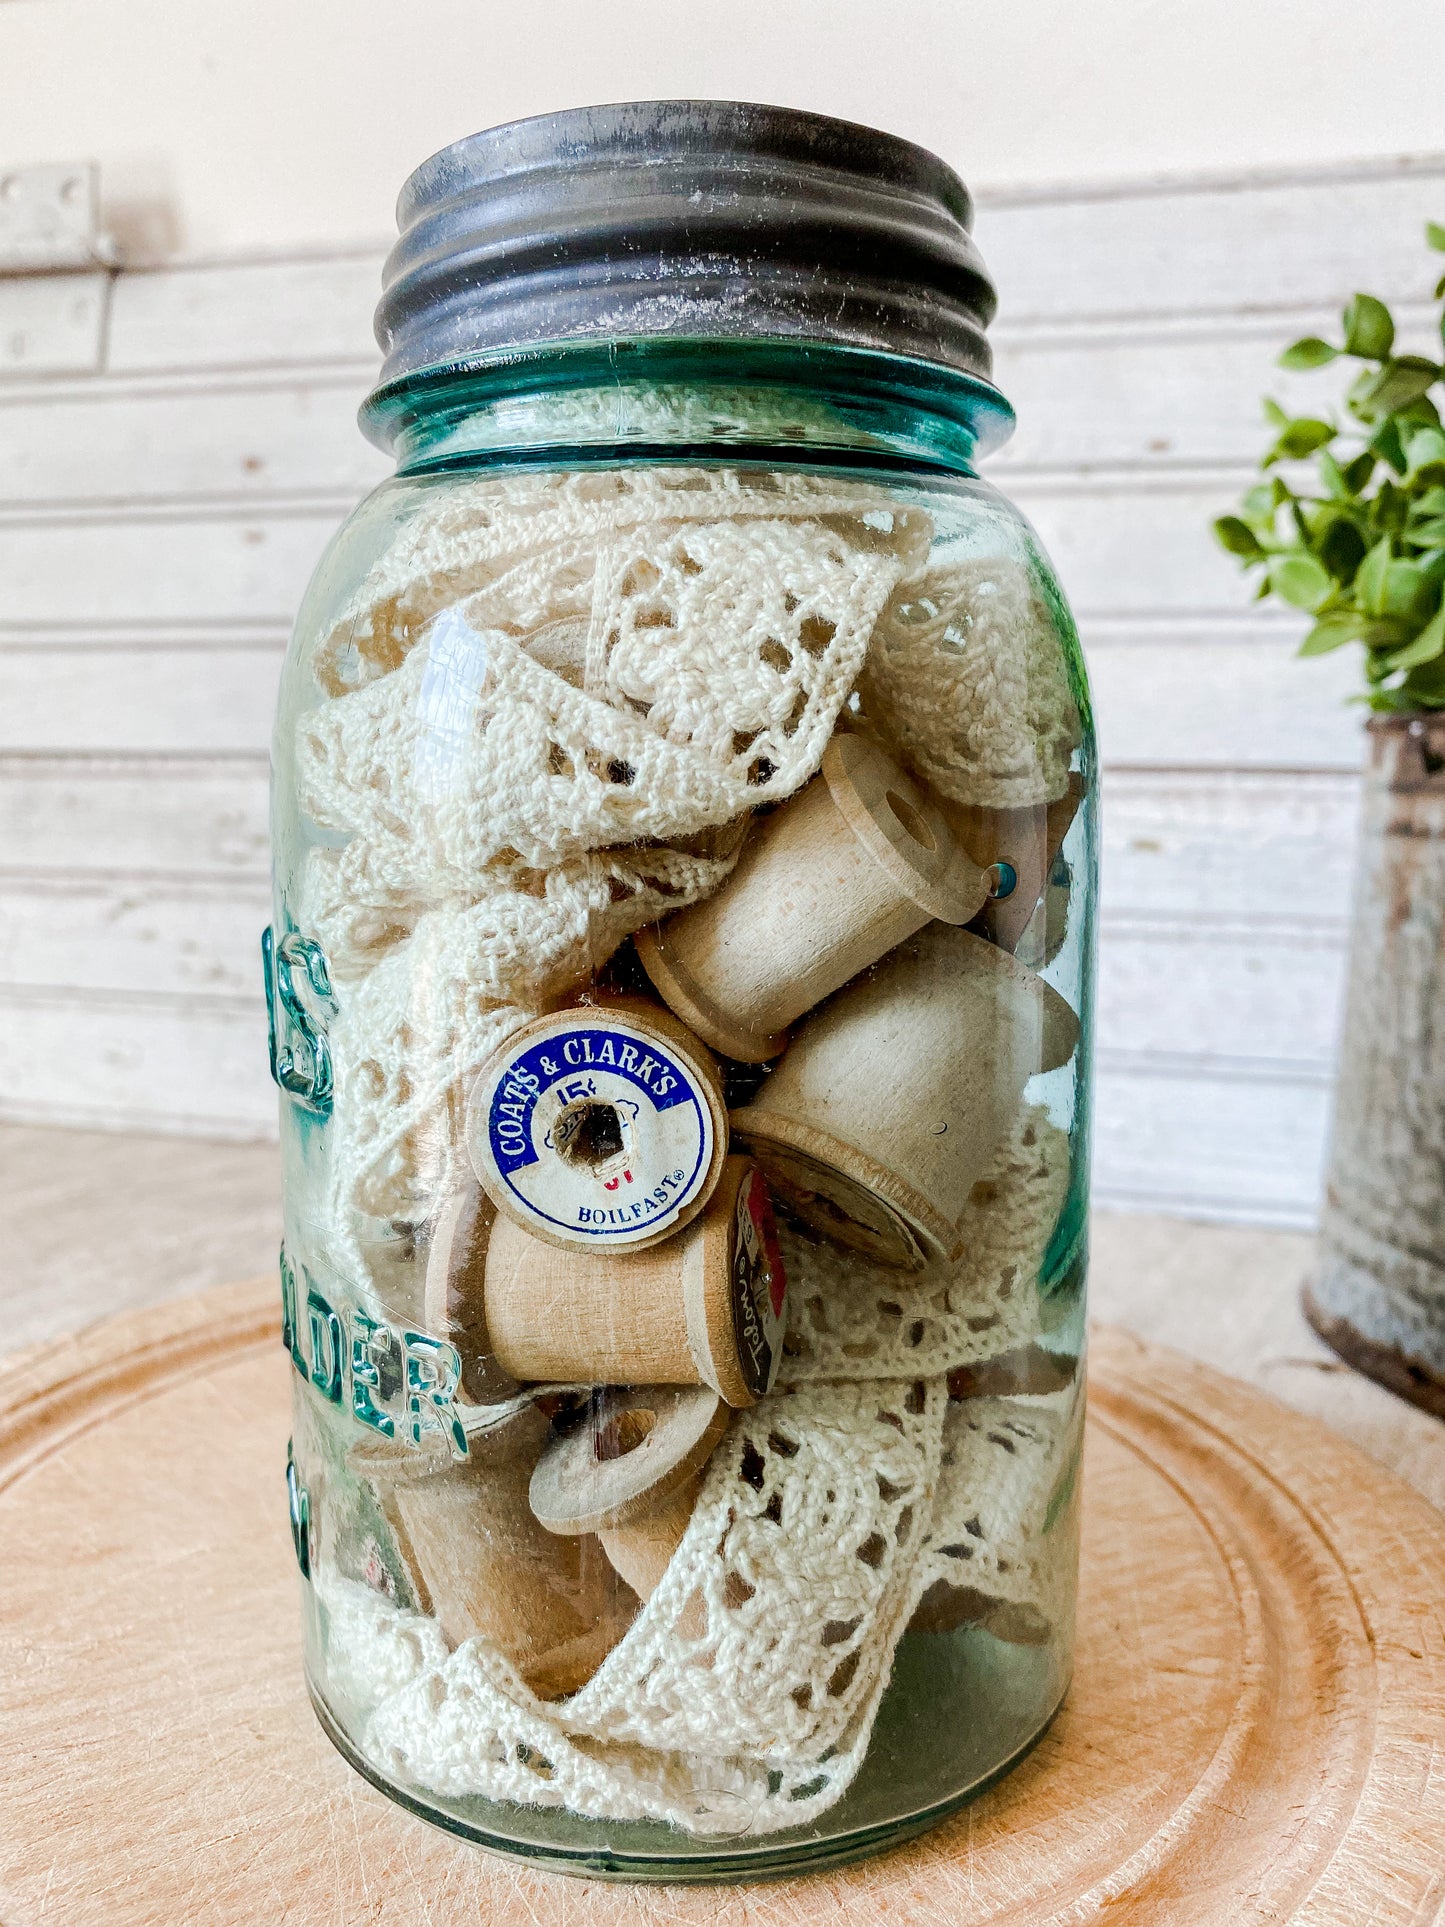 Antique Glass Canning Jar with Spools and Lace | Atlas Strong Shoulder Blue Quart Jar with Zinc Porcelain Screw Top Lid | Instant Collection